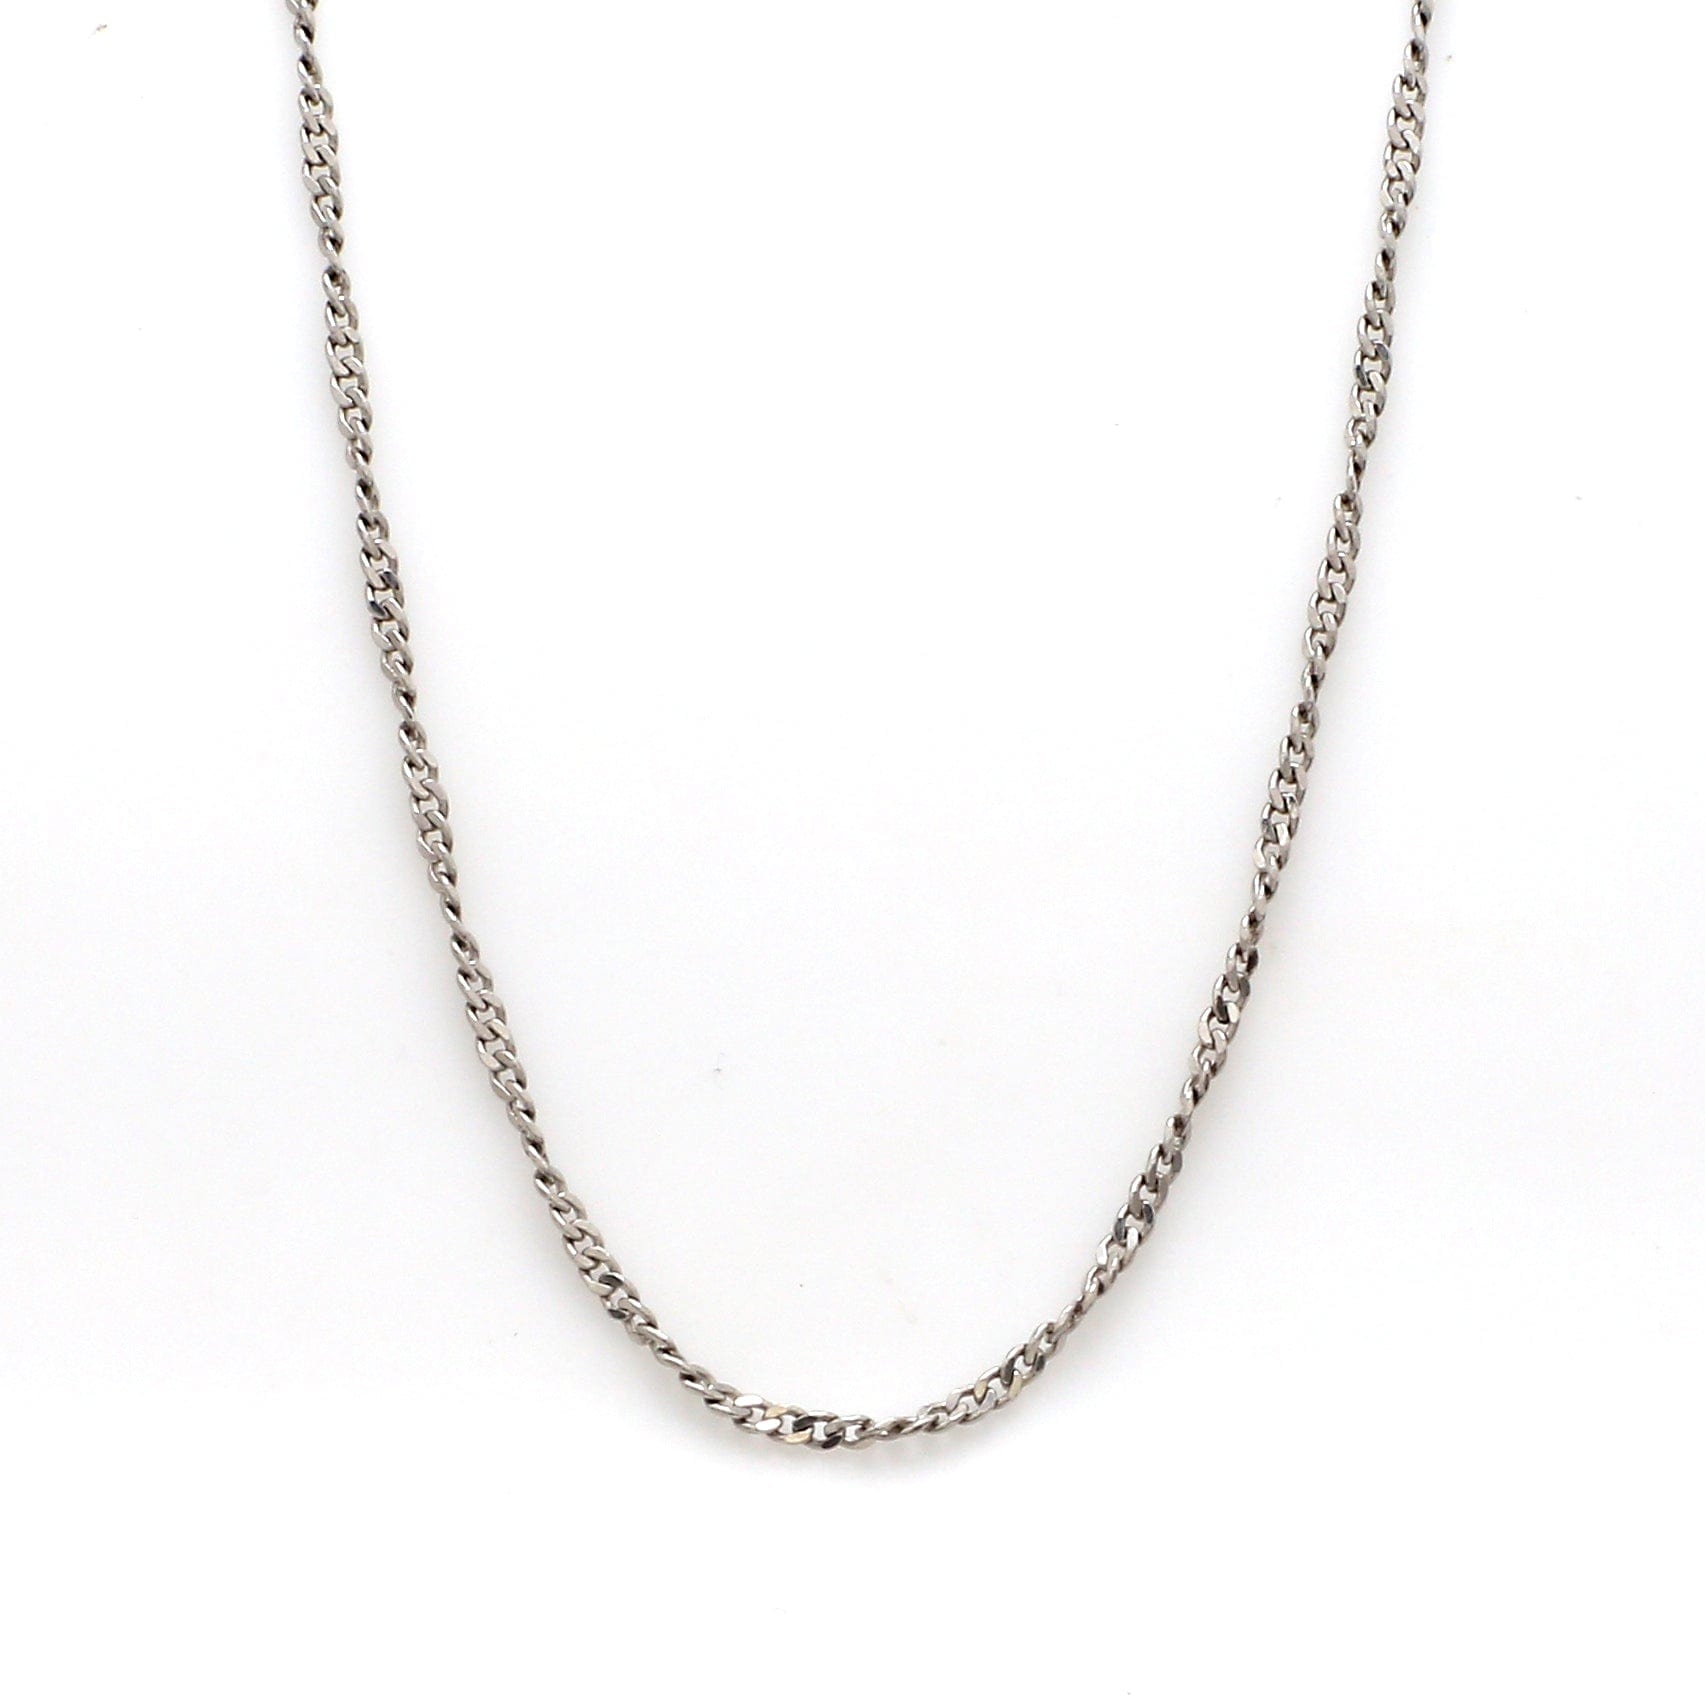 Curb Chain Light Necklace 18 in. / 1.5 mm.